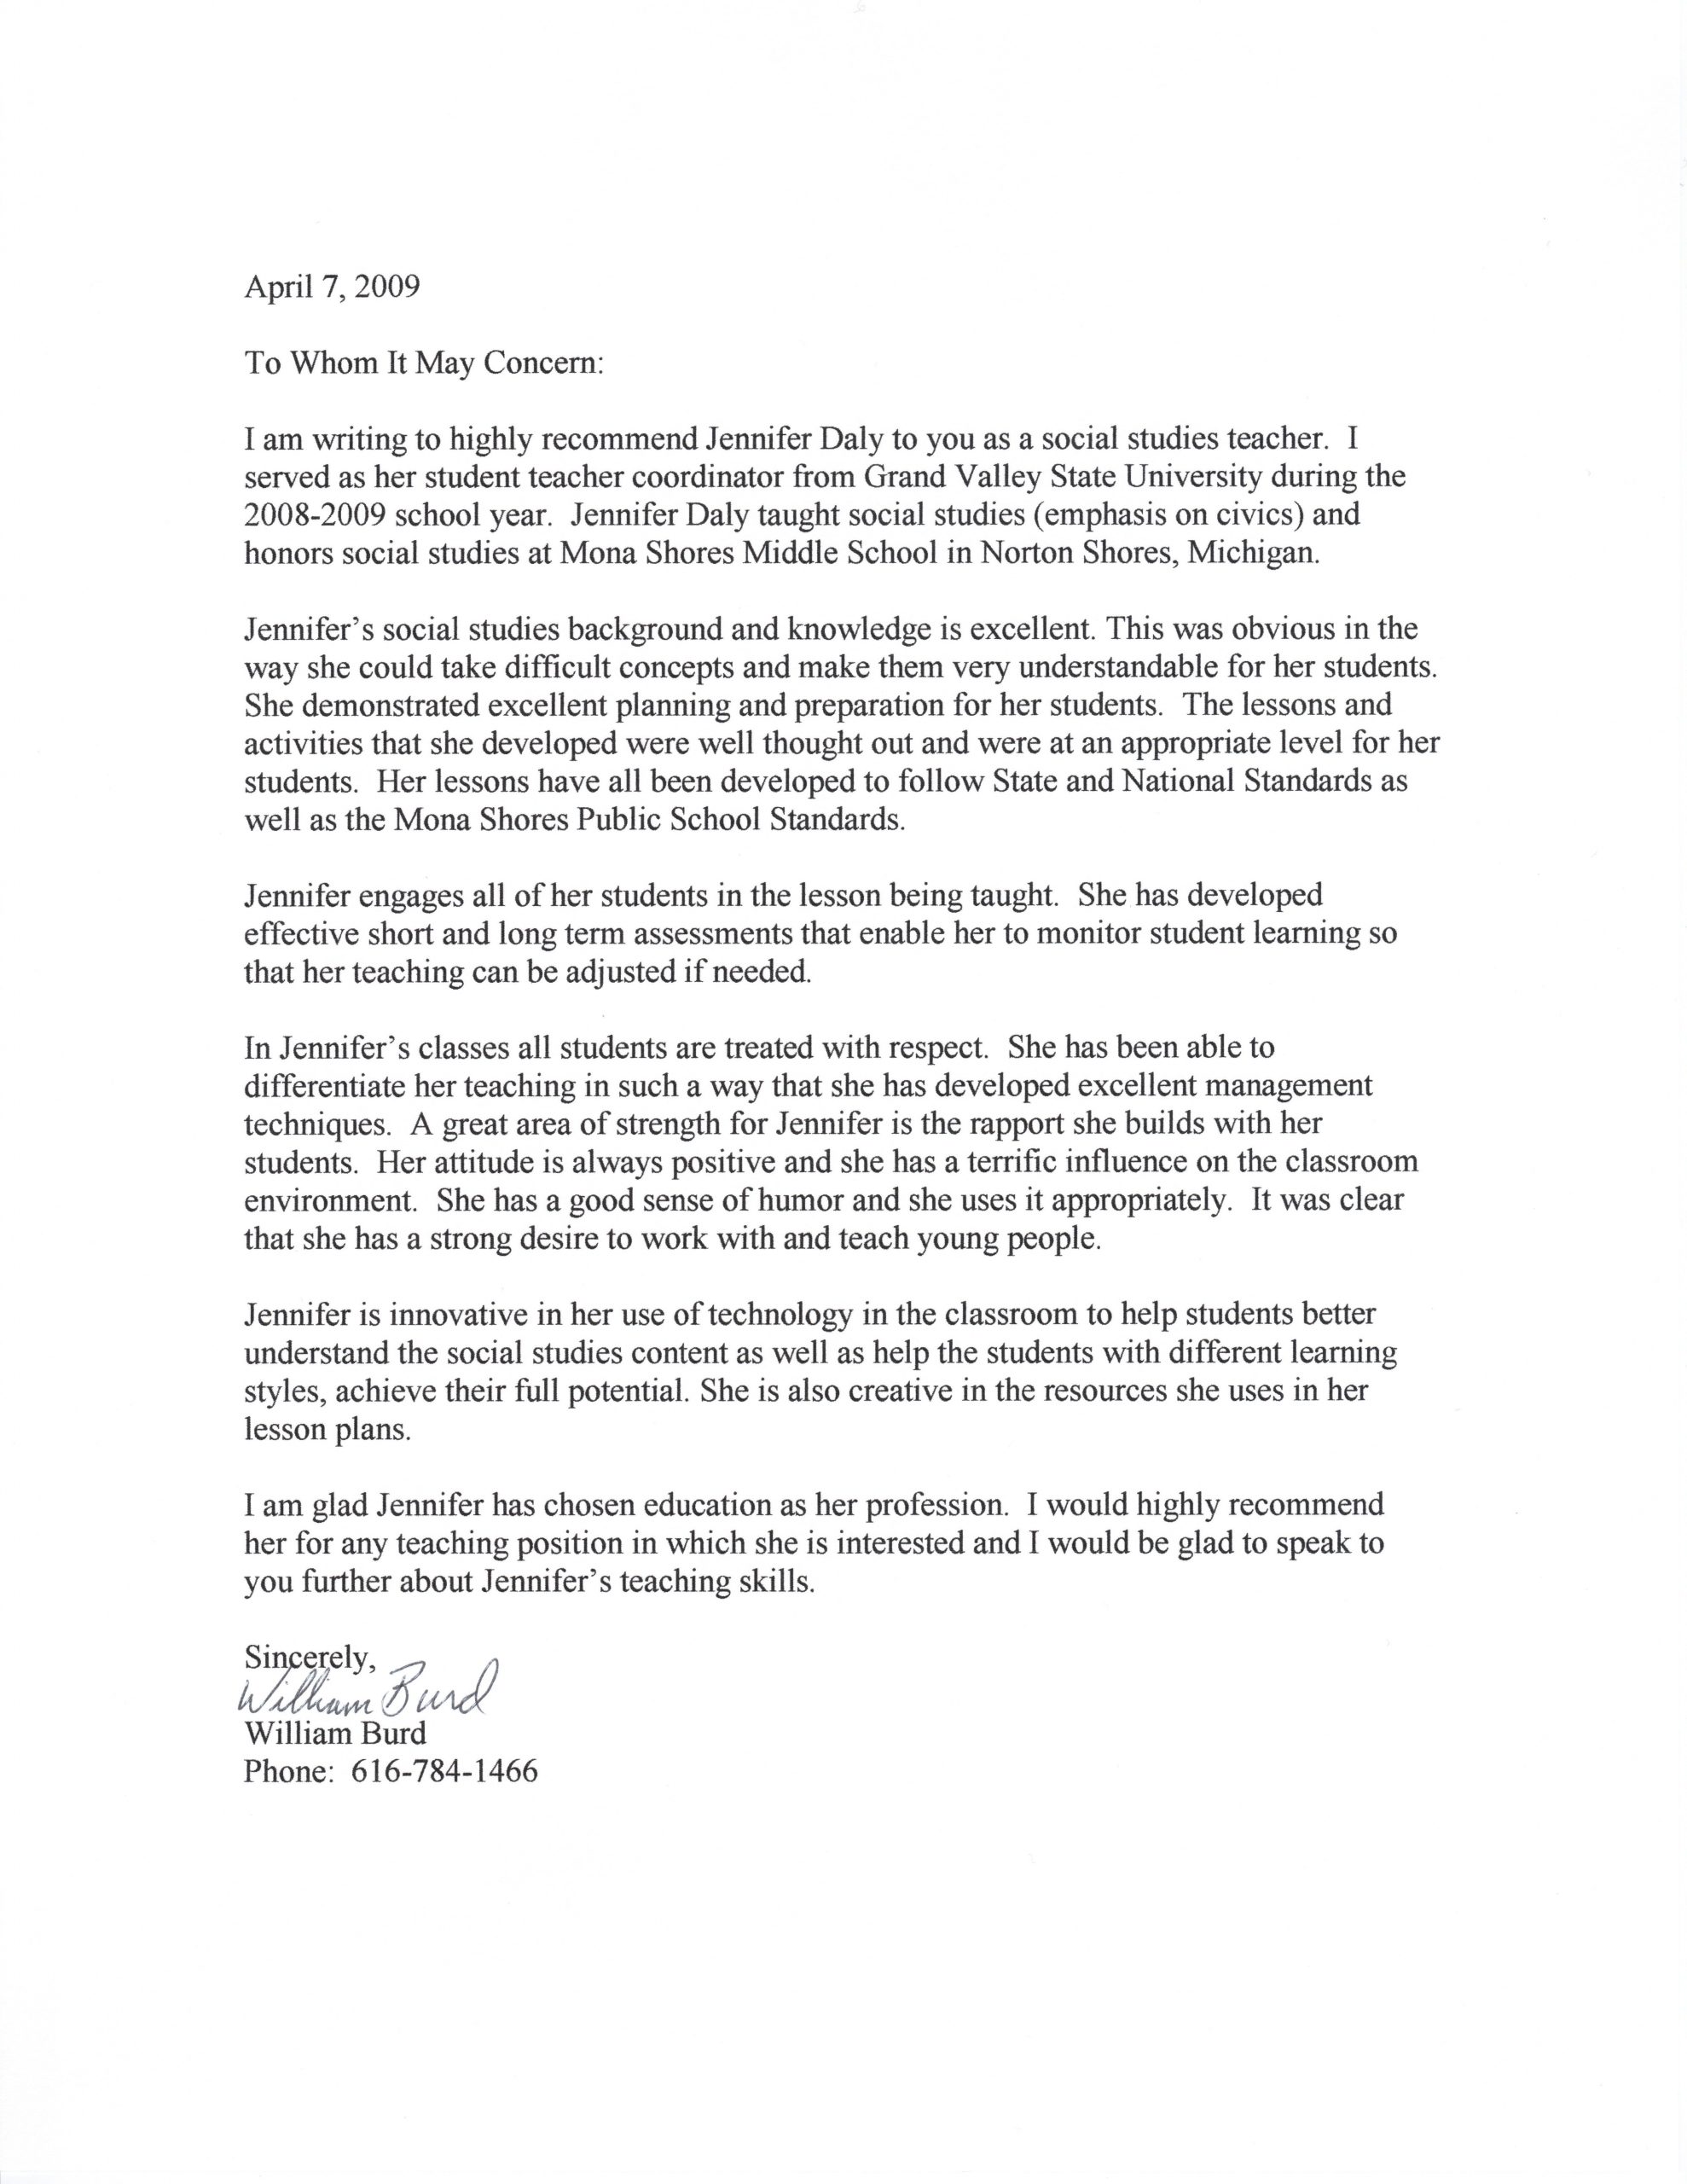 Student Teacher Recommendation Letter Examples Letter Of with dimensions 5100 X 6600